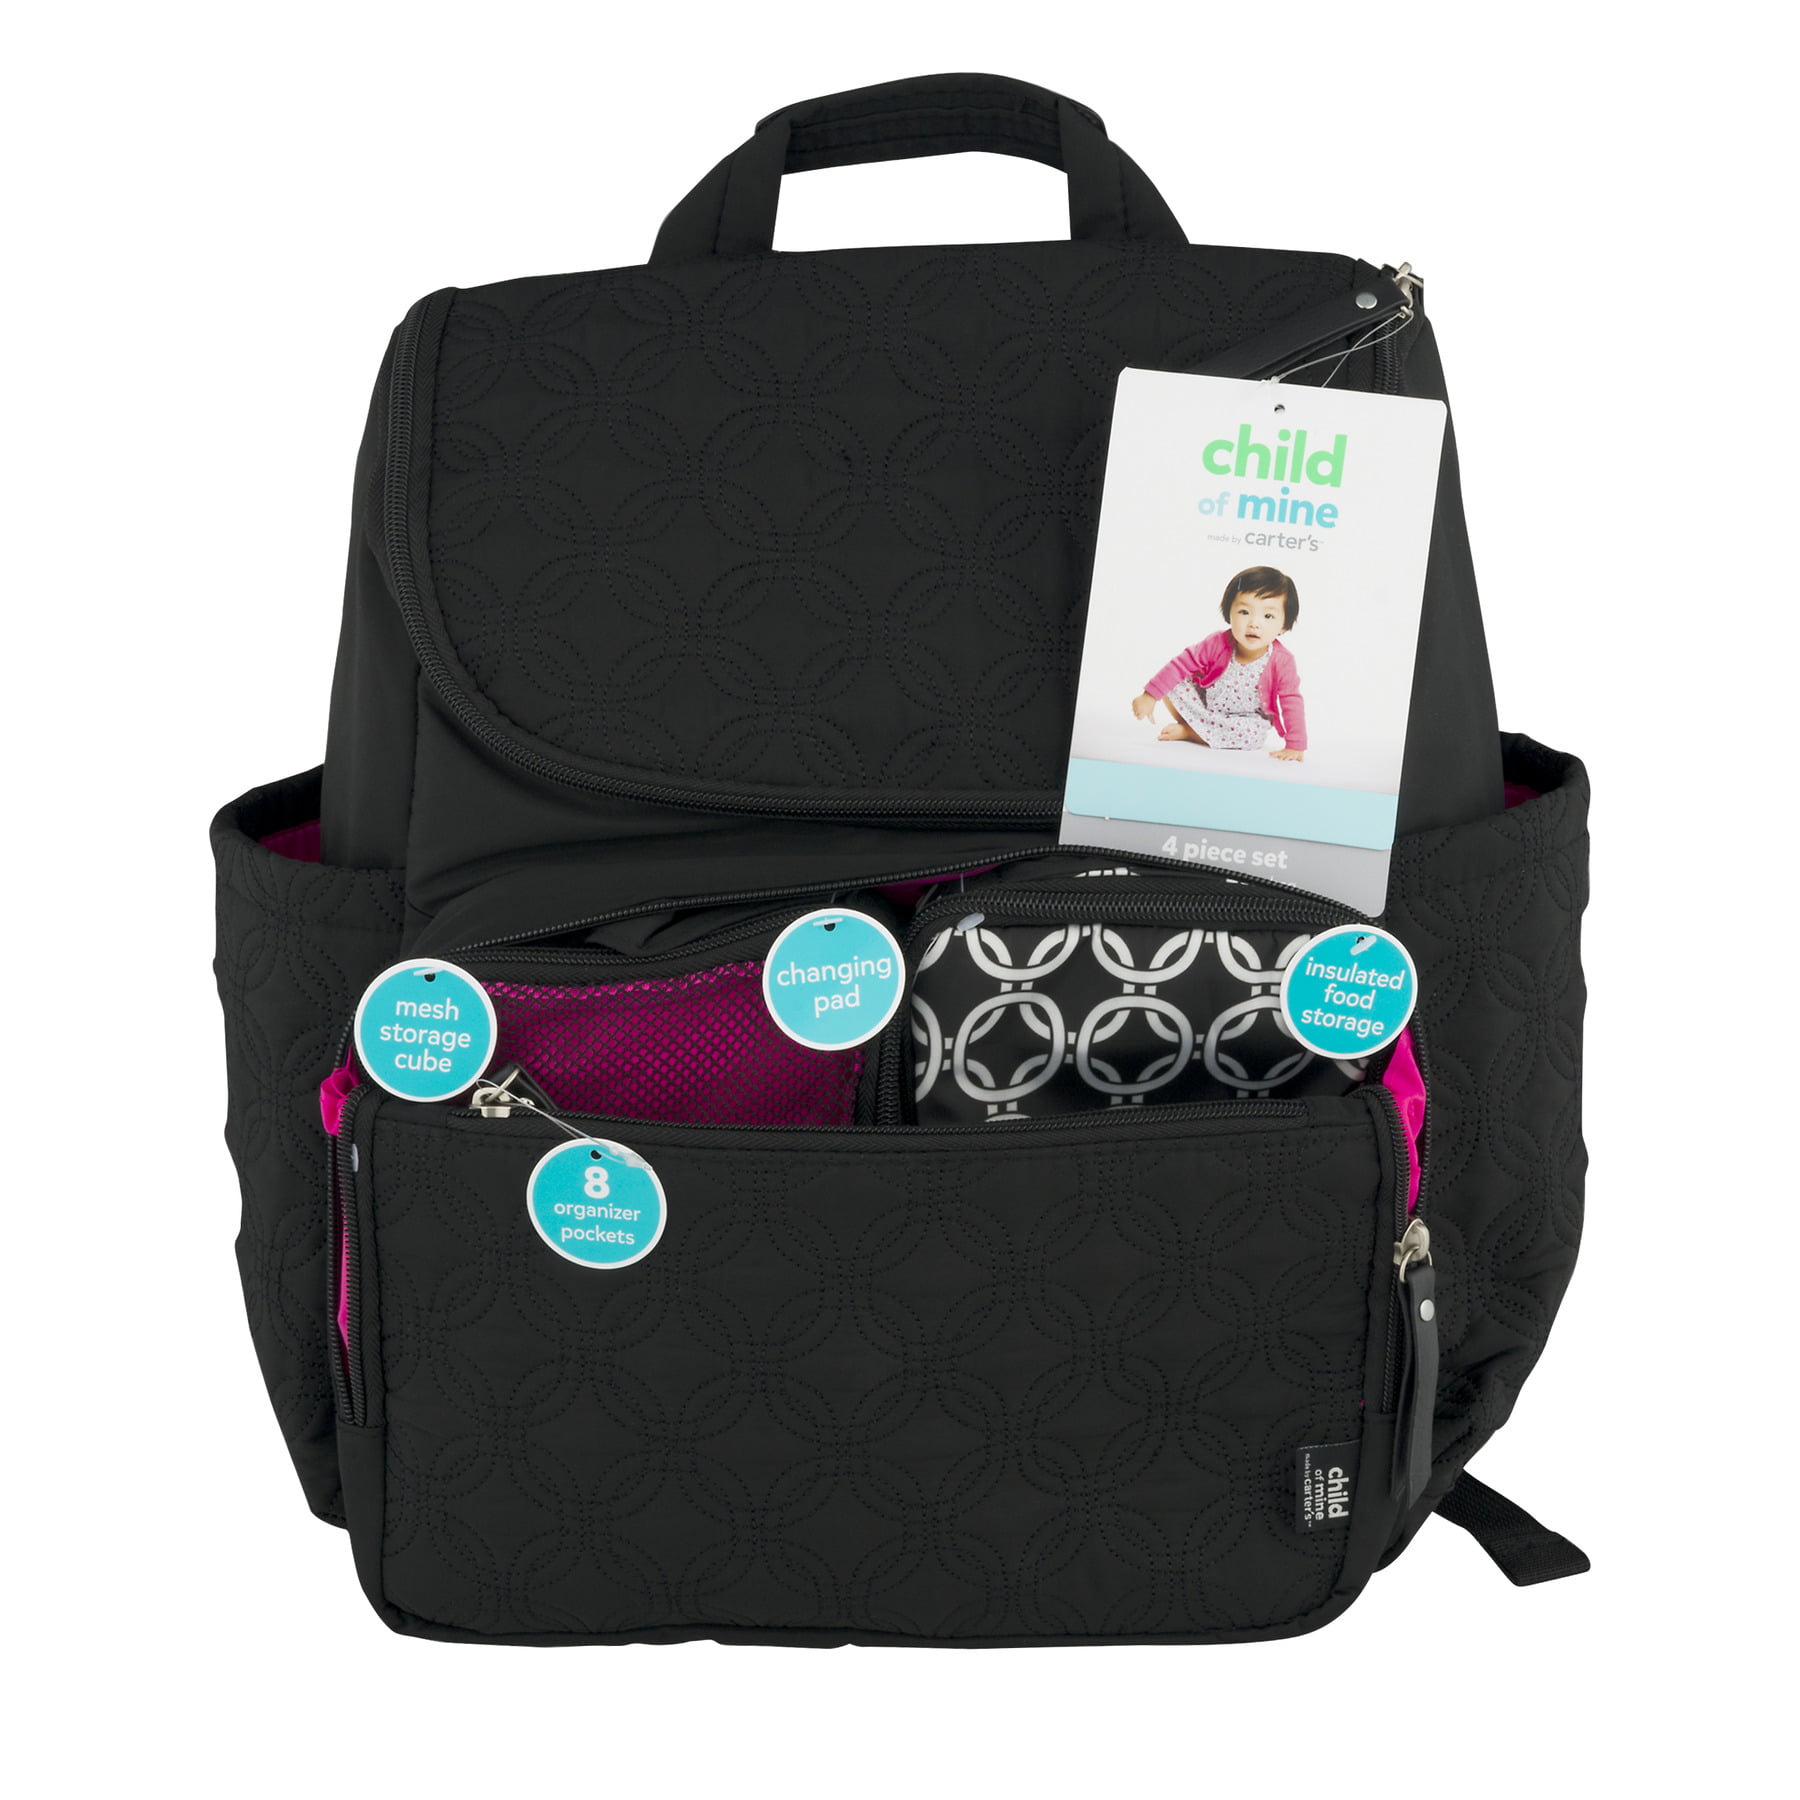 Child of Mine by Carter&#39;s Quilted Backpack Diaper Bag, Black - www.bagssaleusa.com